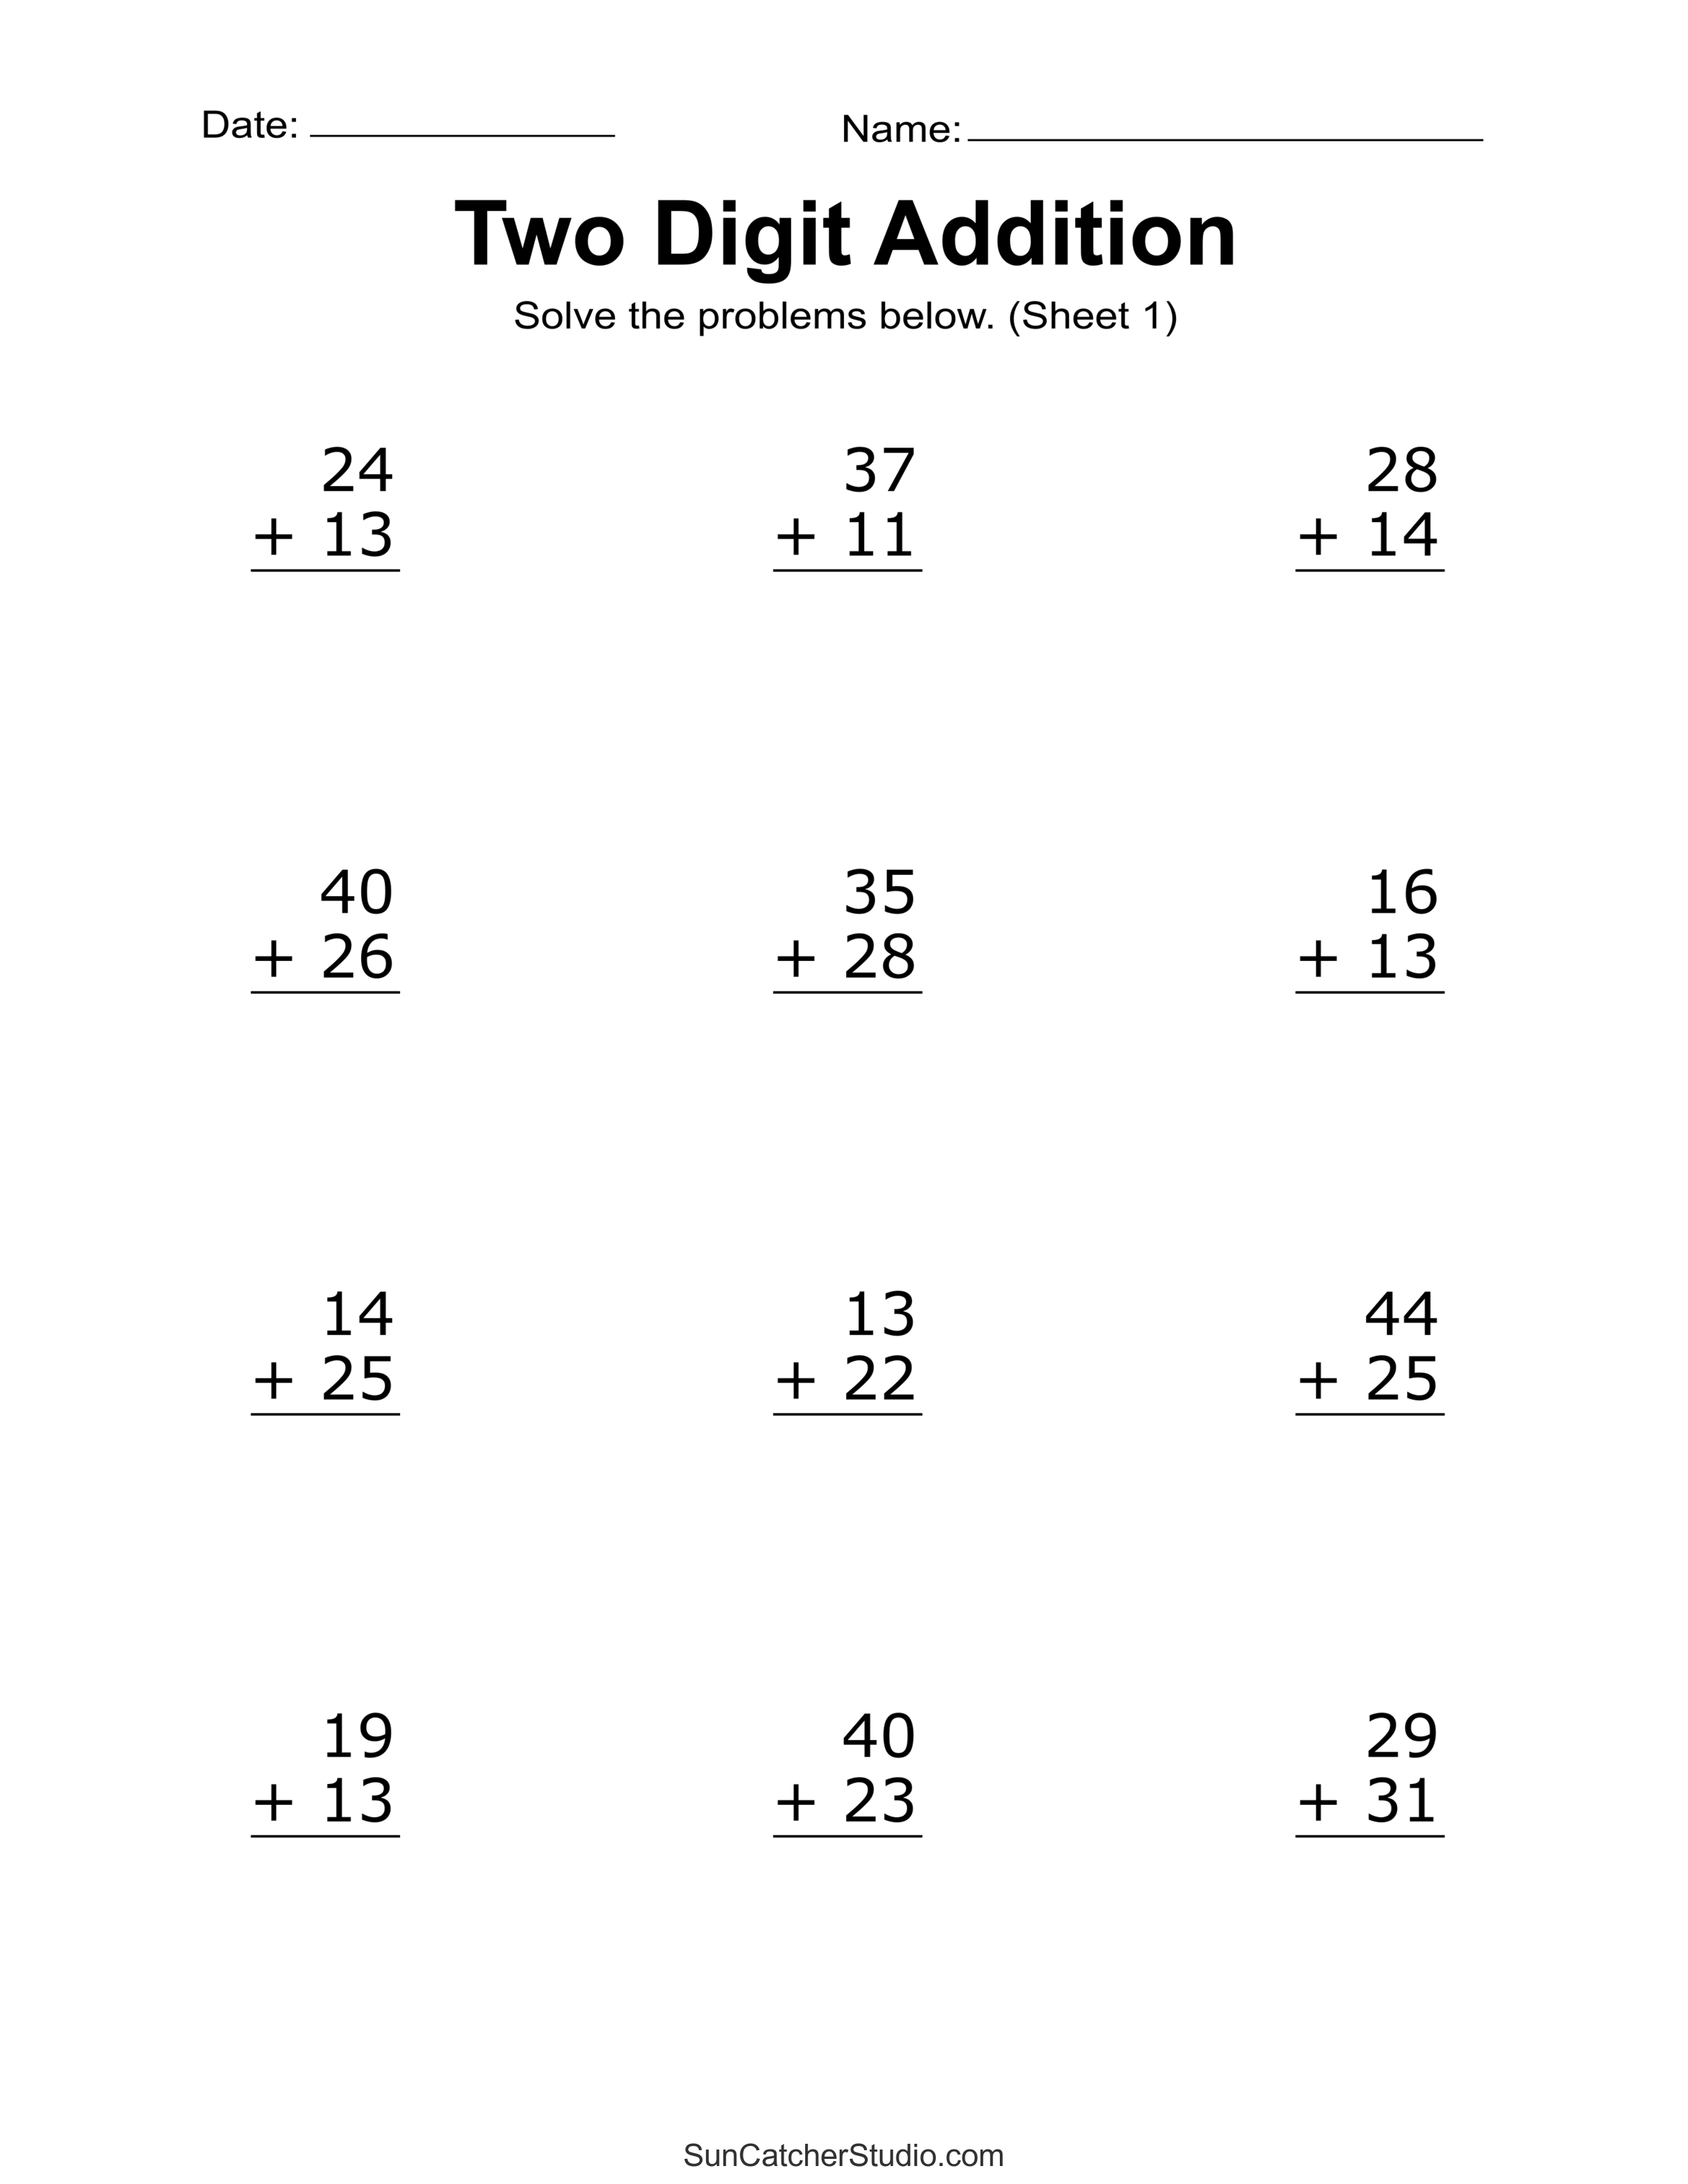 Two Digit Addition Worksheets Printable 2 Digit Problems DIY Projects Patterns Monograms